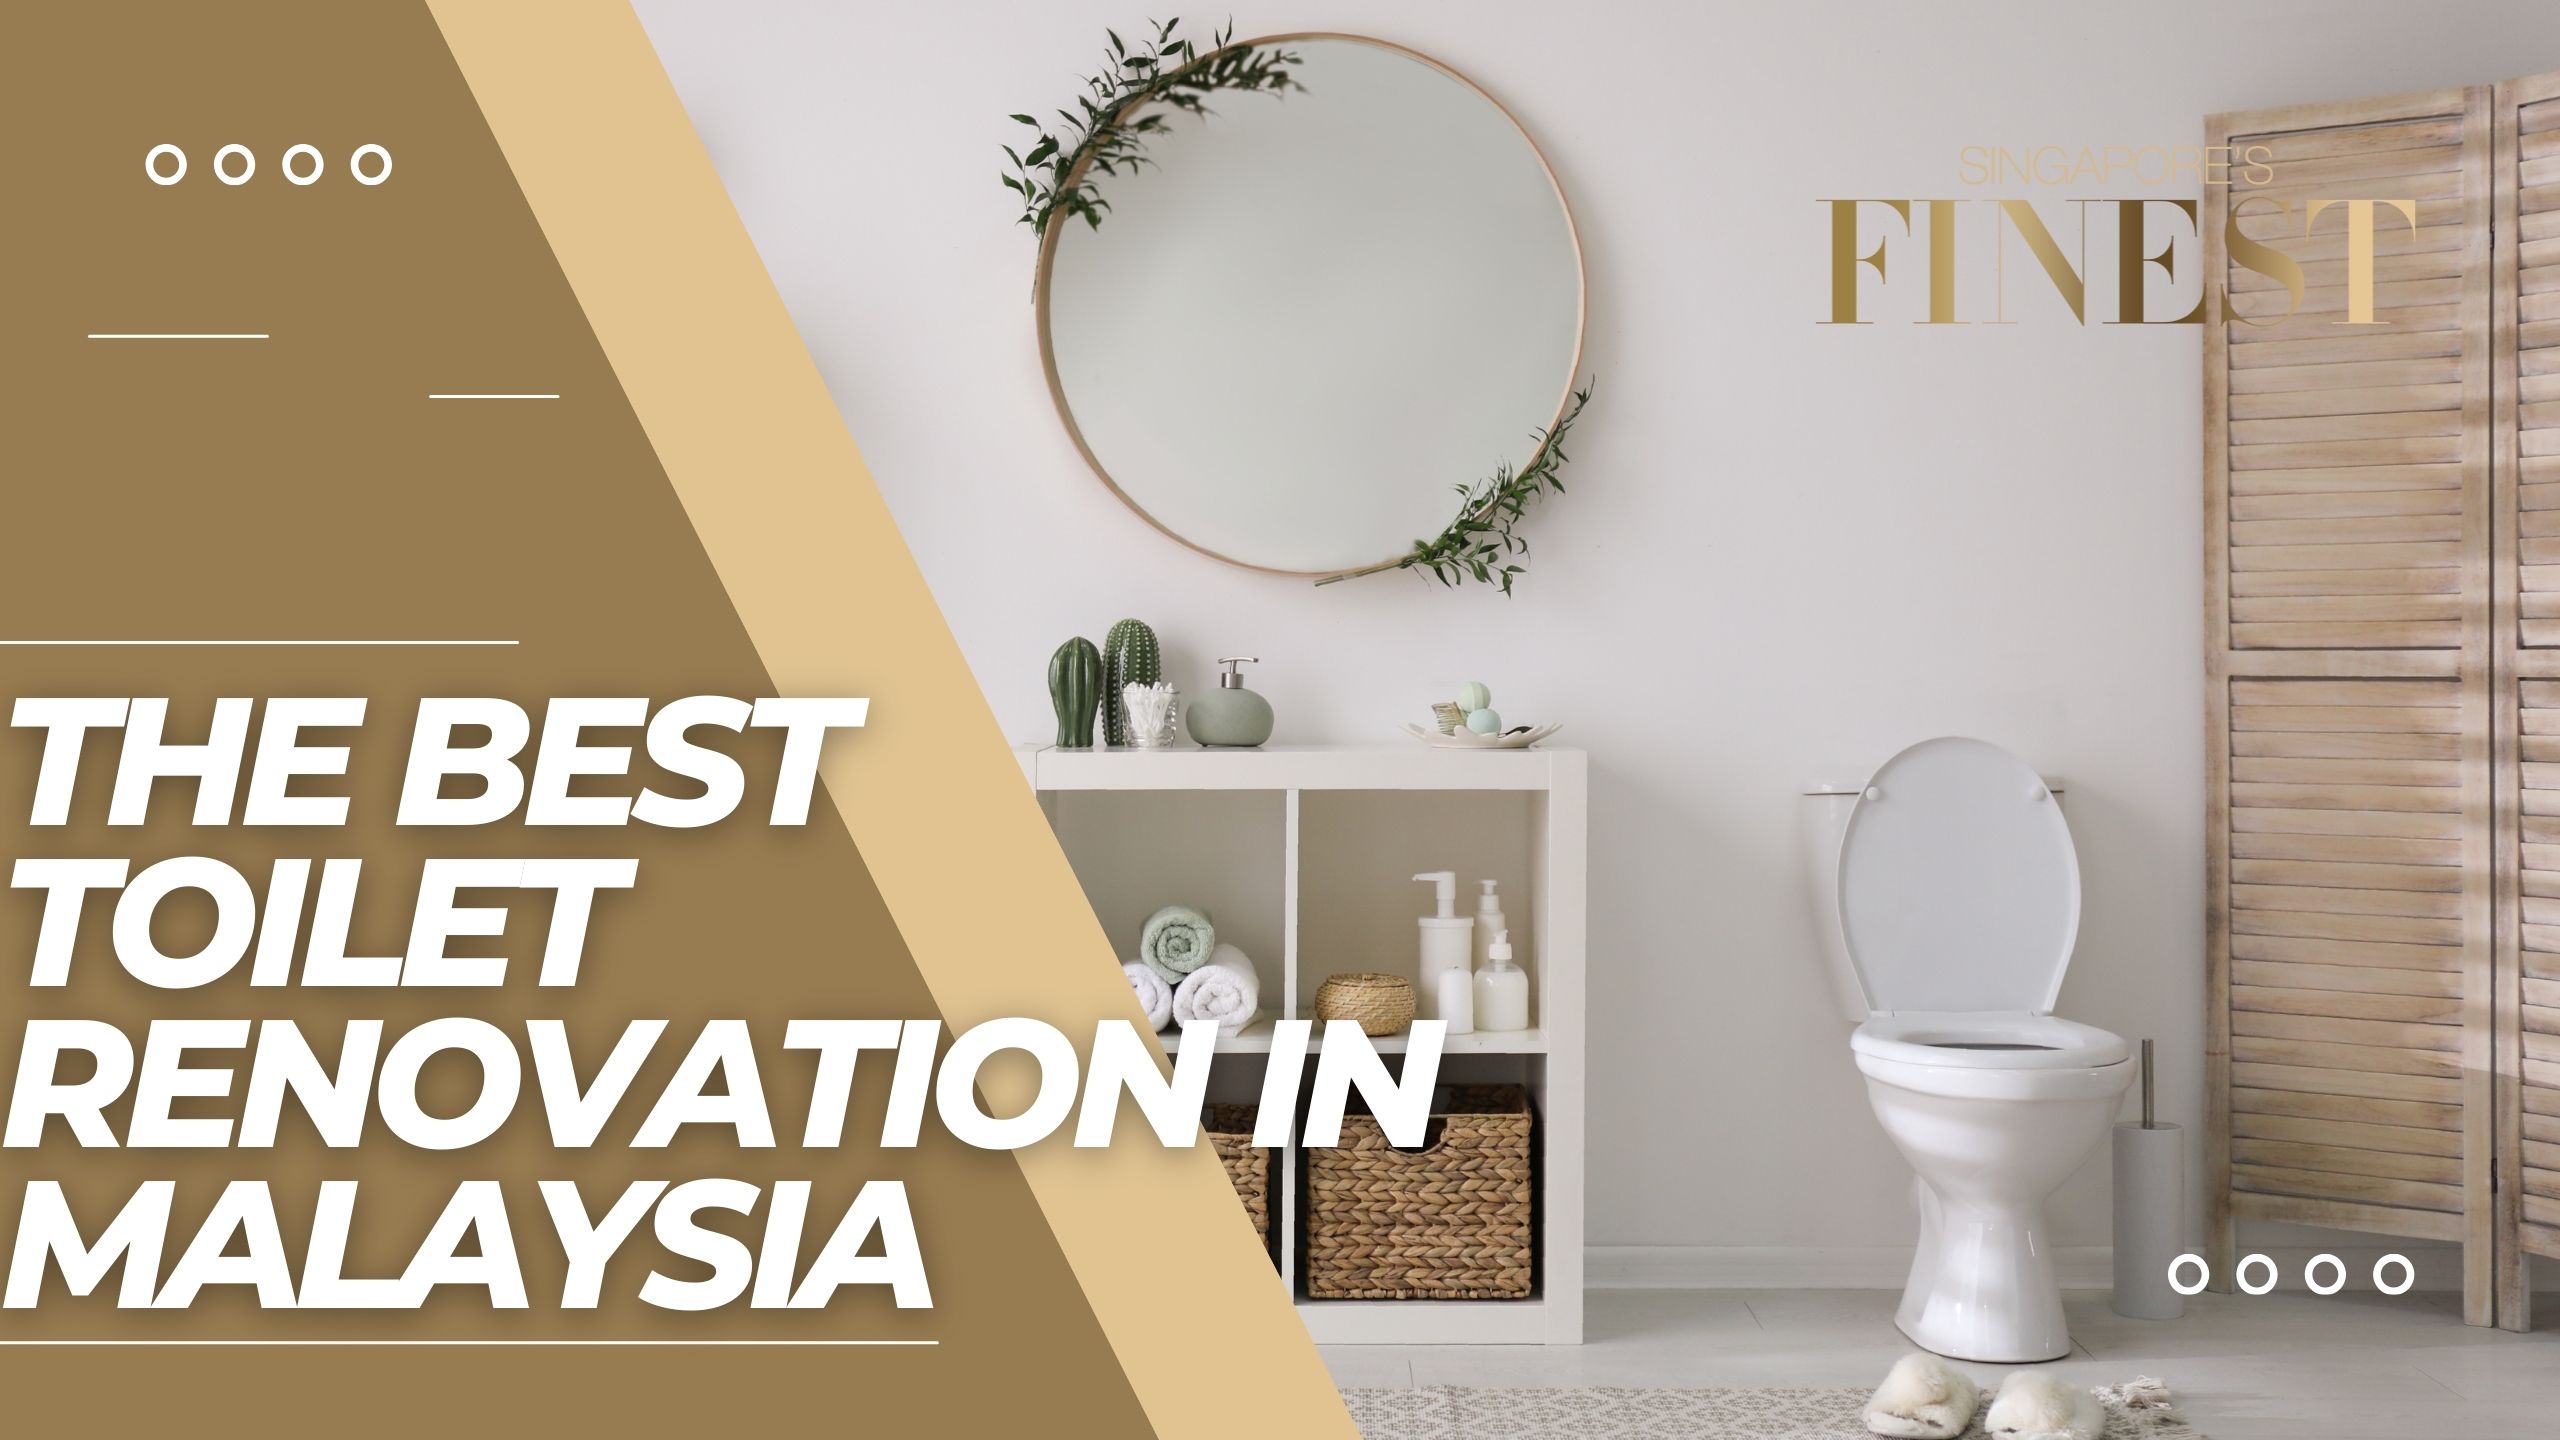 The Finest Toilet Renovation in Malaysia